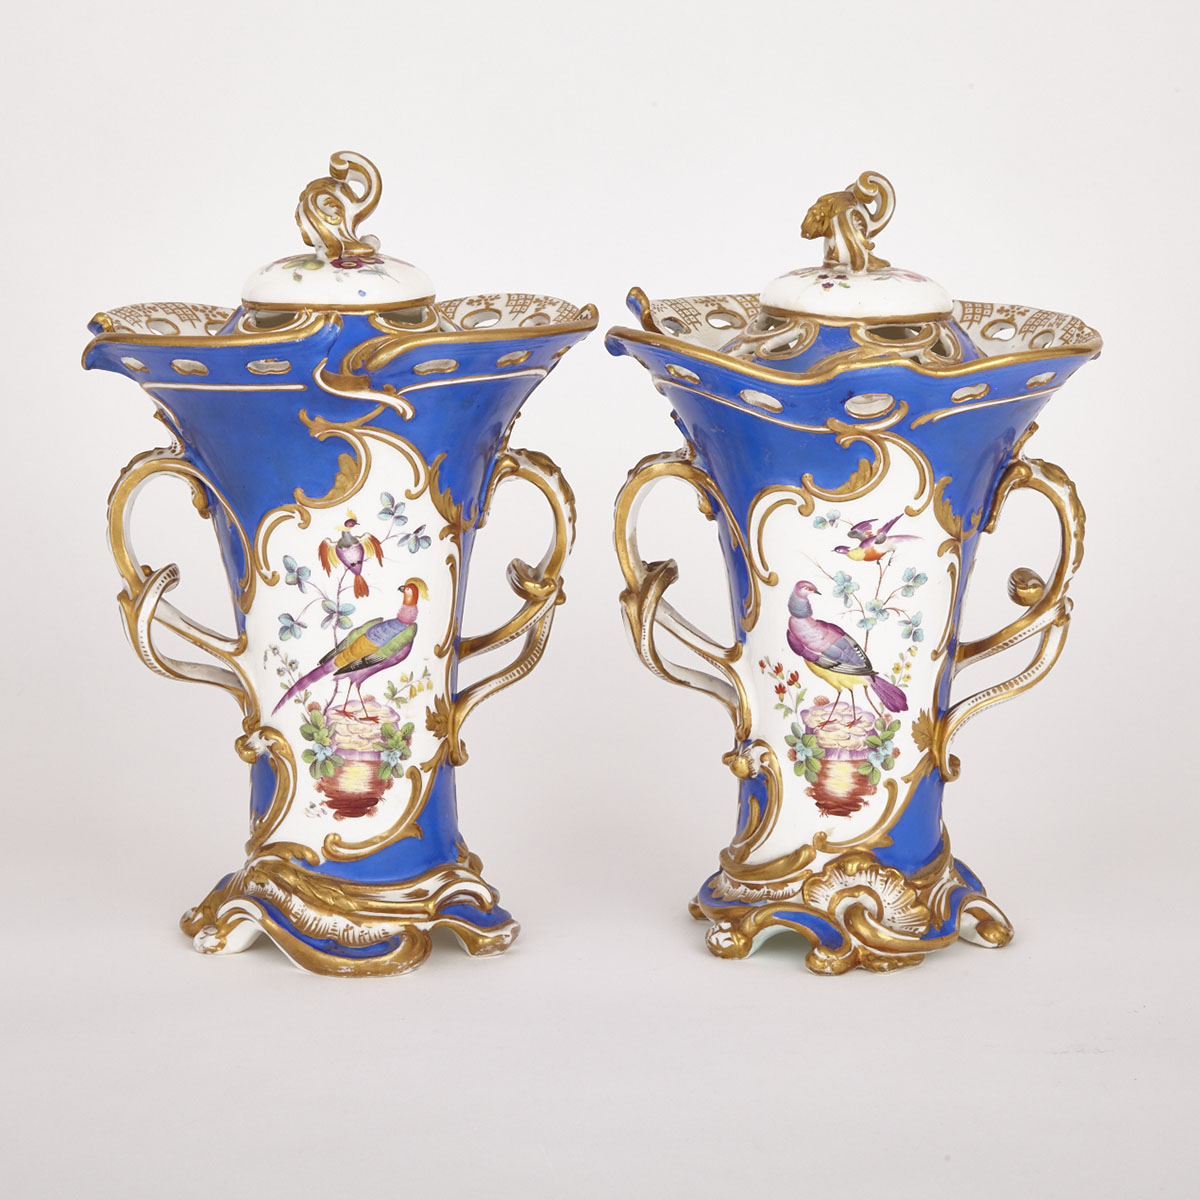 Pair of English Porcelain Two-Handled Potpourri Vases and Covers, mid-19th century